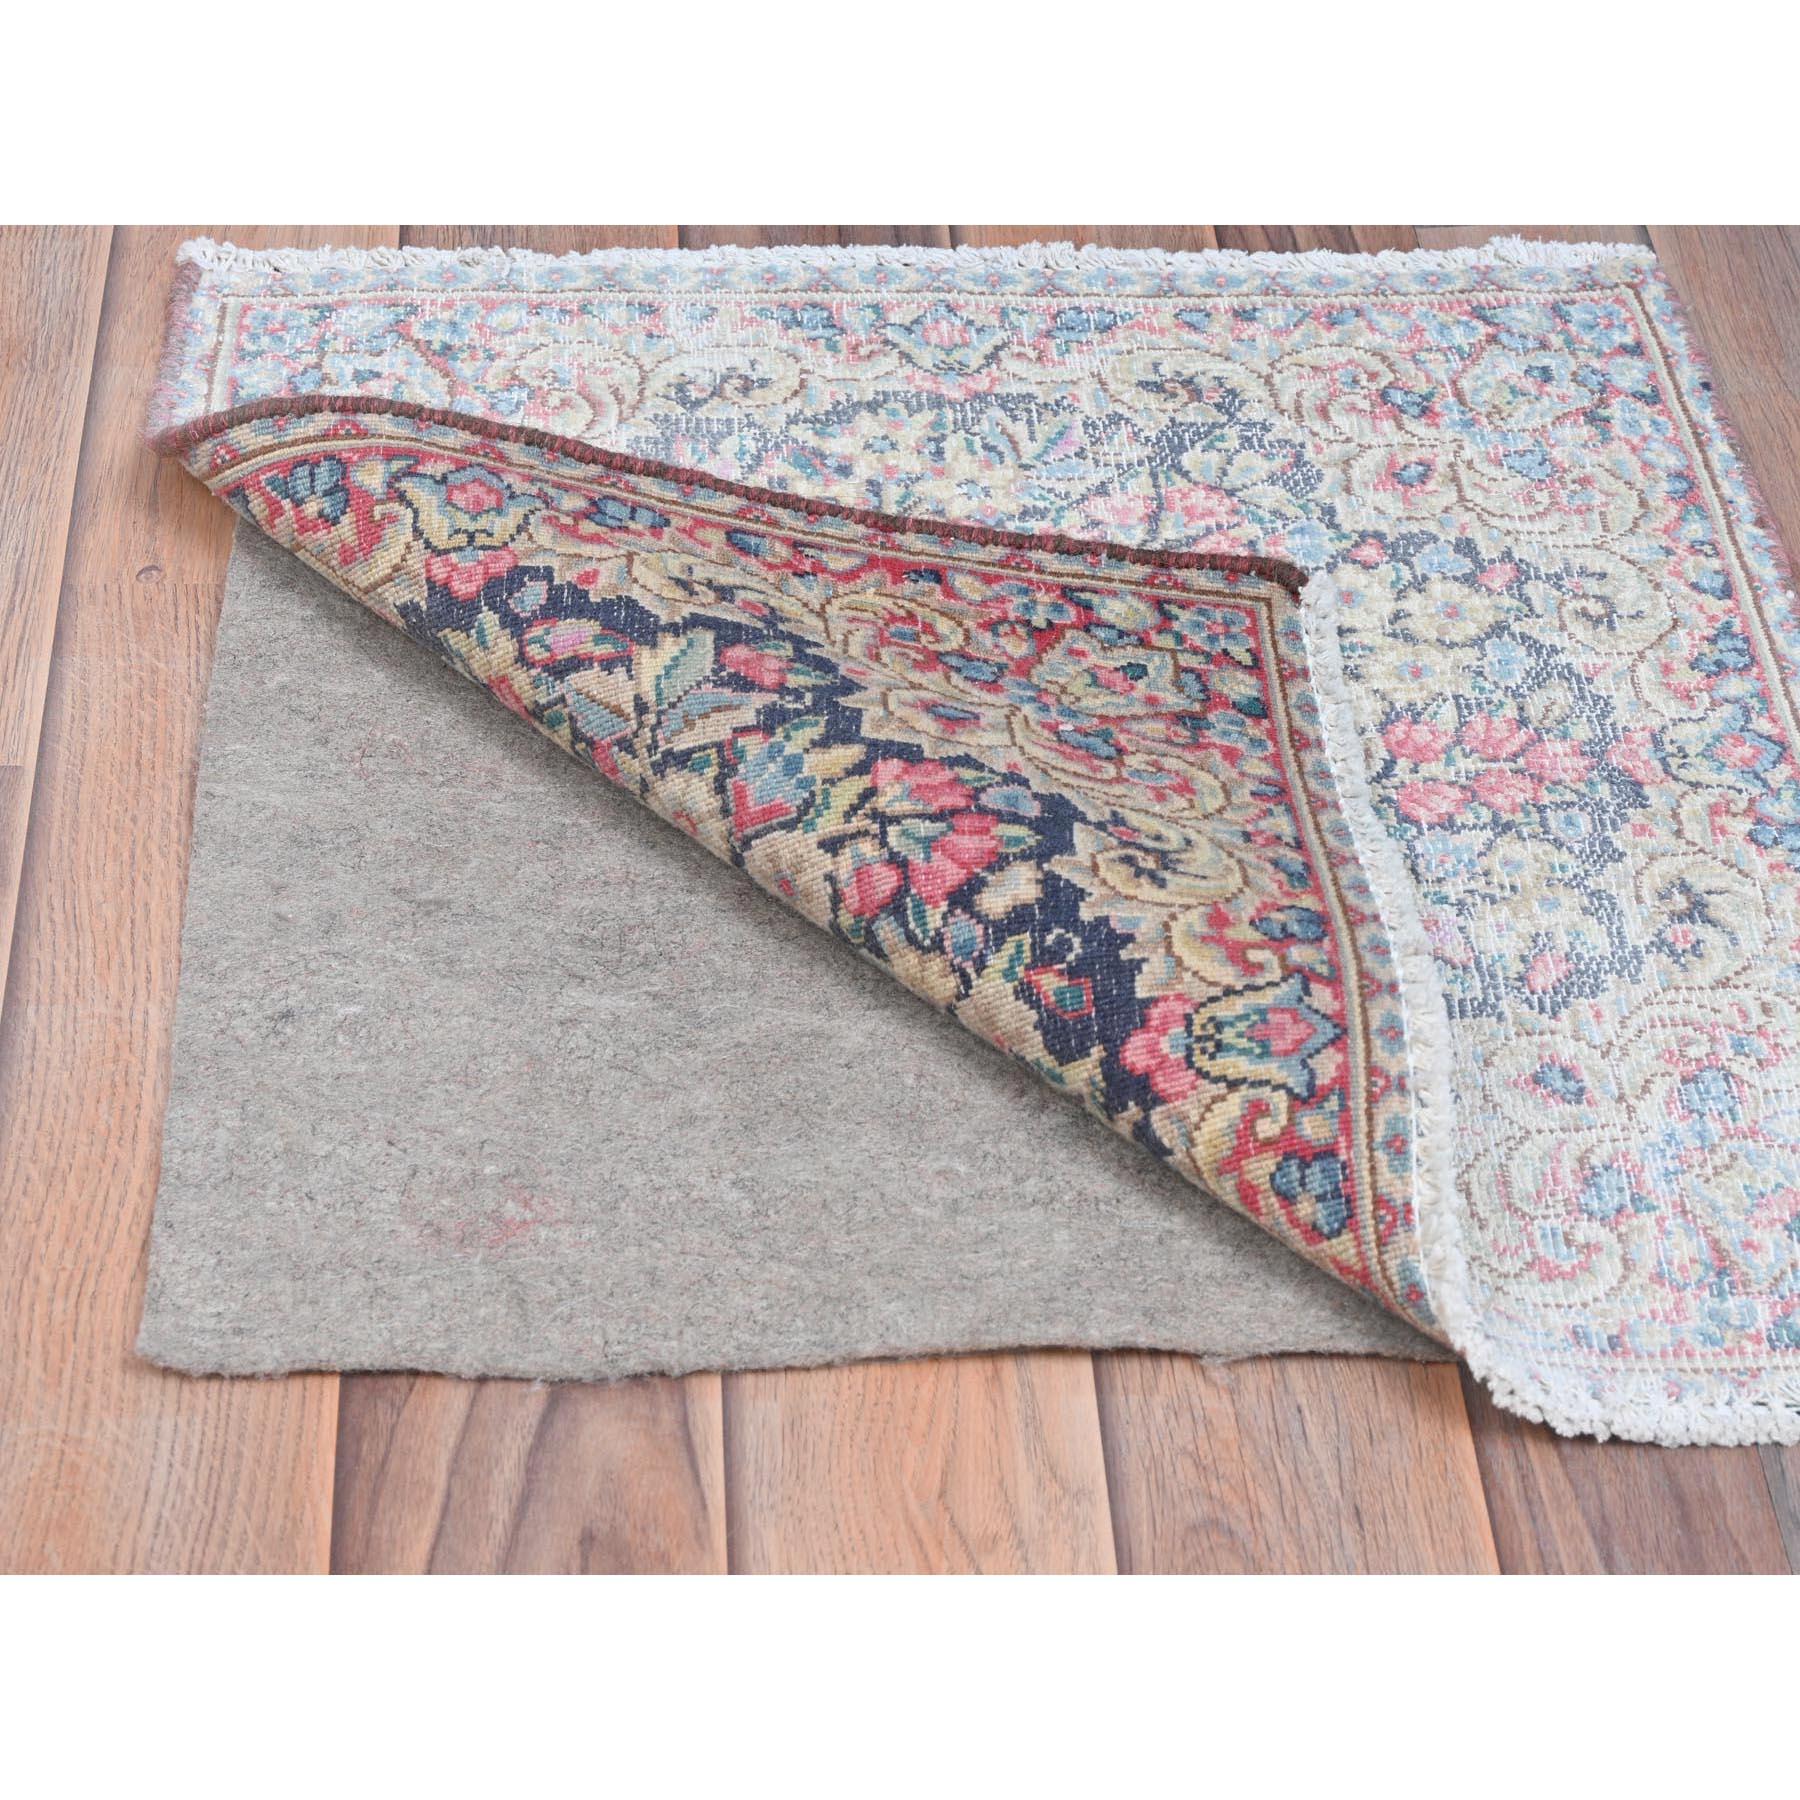 Medieval Colorful Old Persian Kerman Shabby Chic Hand Knotted Distressed Worn Wool Rug For Sale